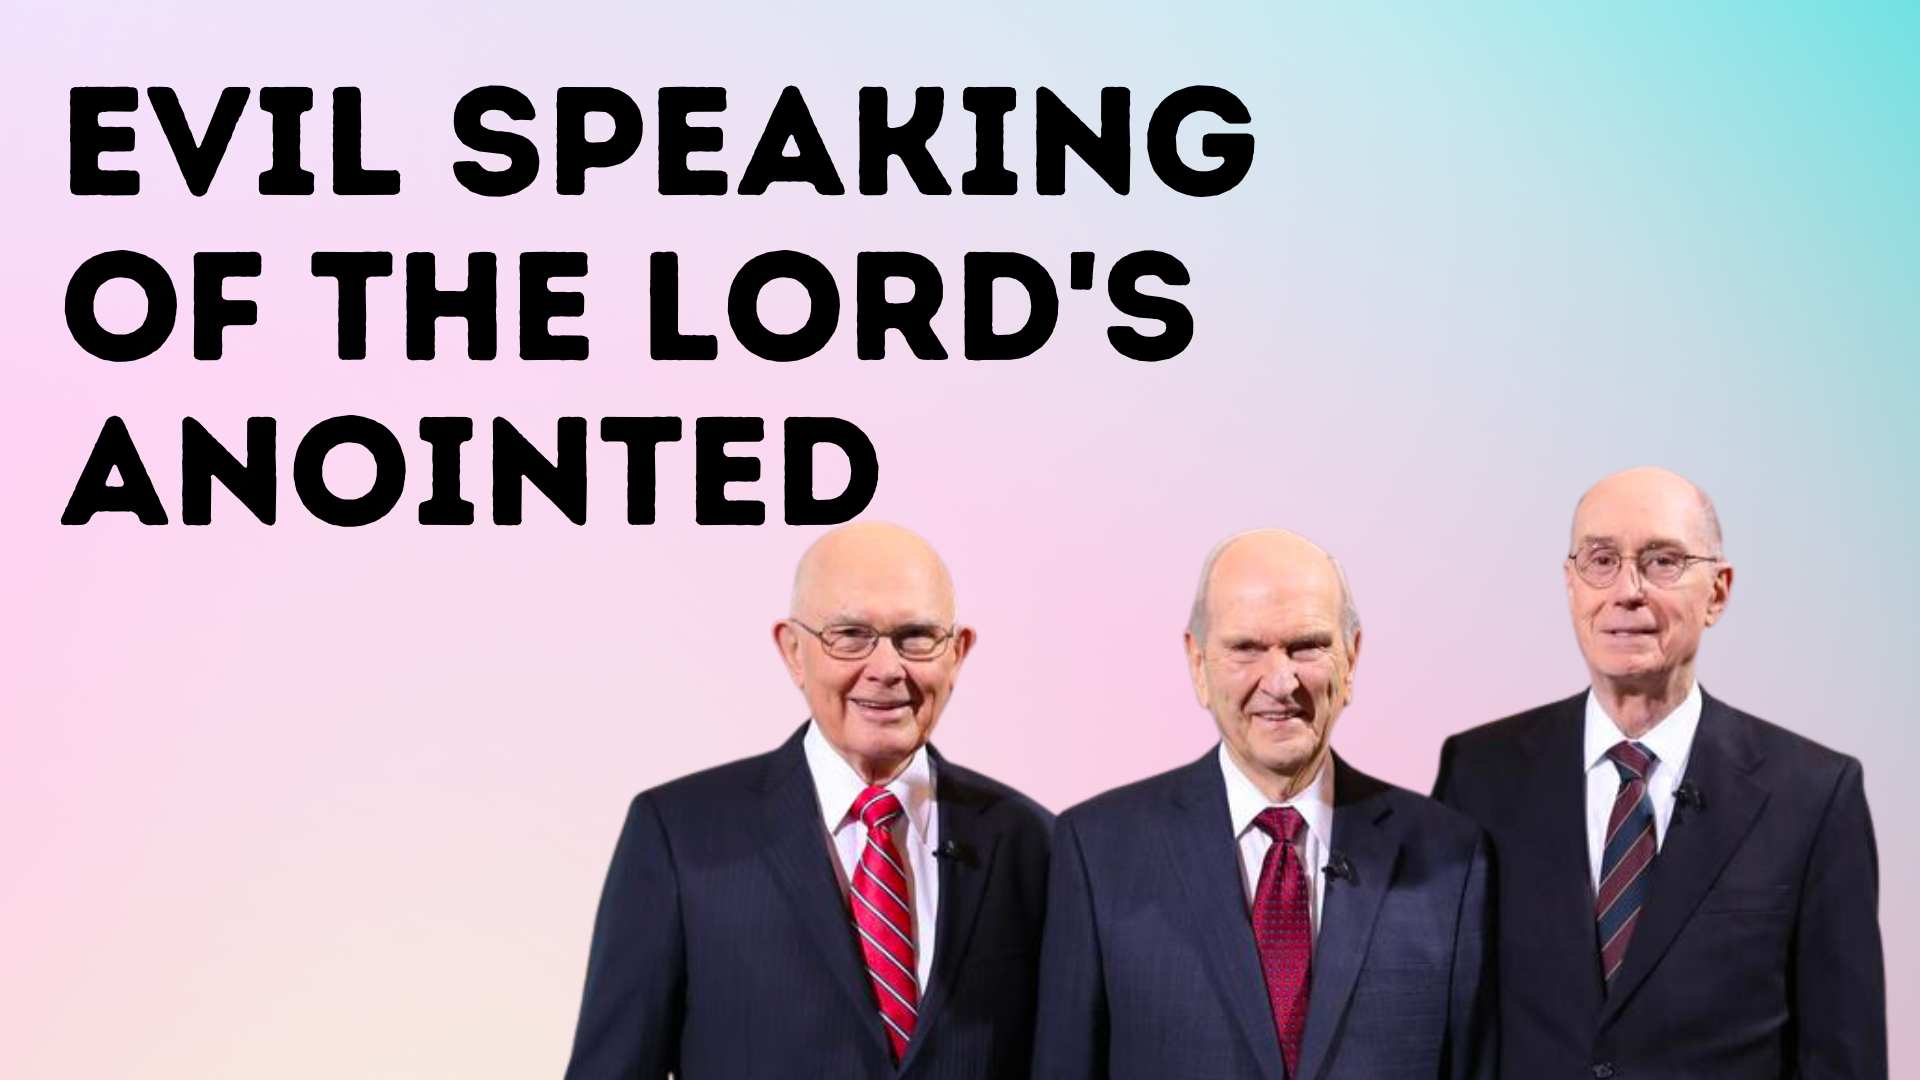 Evil Speaking of the Lord's Anointed